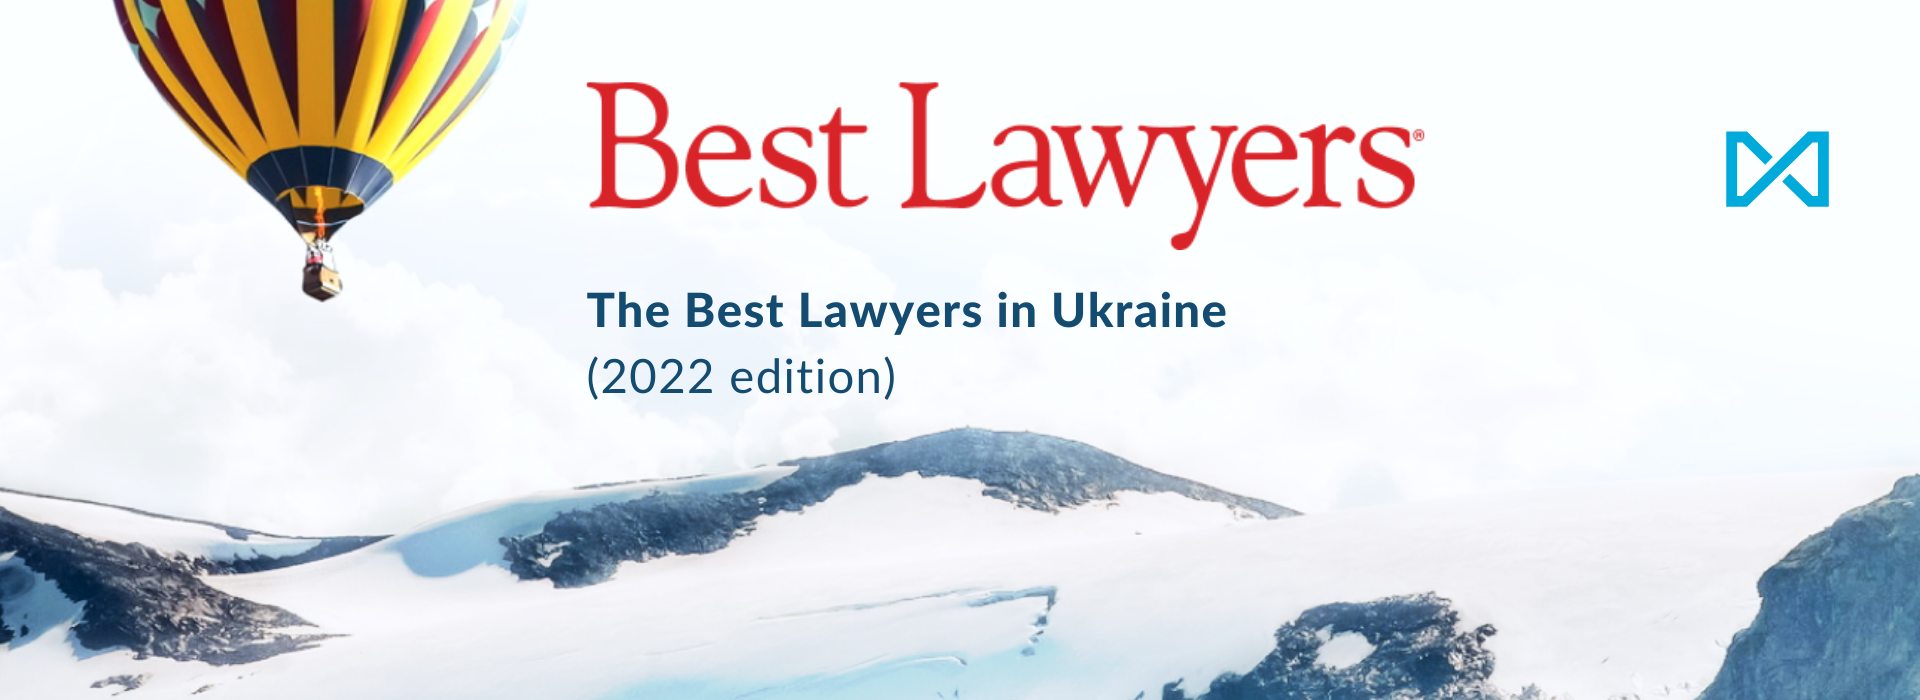 EVERLEGAL Is Ranked by The Best Lawyers in Ukraine 2022